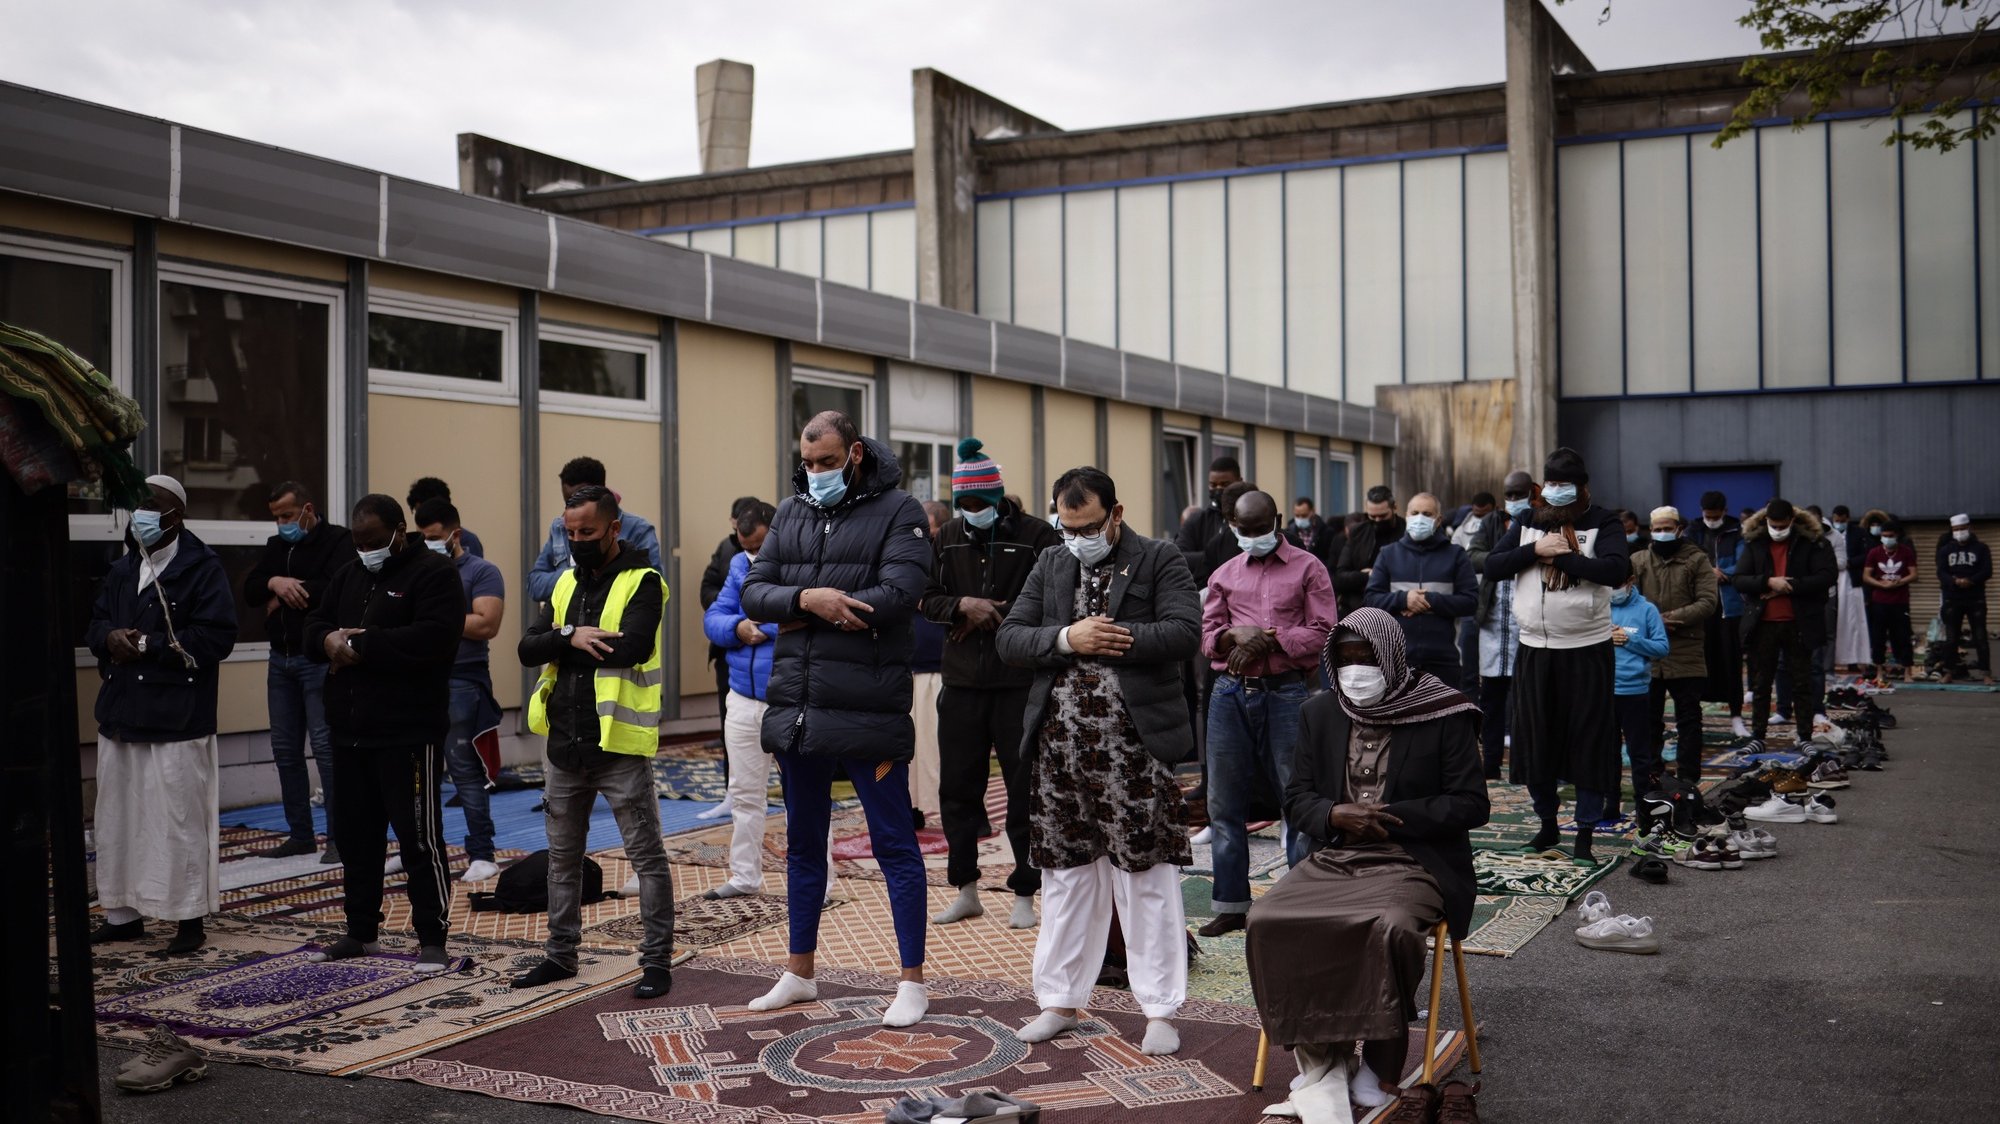 epa09124486 Muslim men preform Friday prayers on the reopening day of the Great Mosque in Pantin, near Paris, France, 09 April 2021. After six months of administrative closure for having relayed video following the terrorist attack and death of French teacher Samuel Party in Conflans-Sainte-Honorine, the Great Mosque of Pantin is now reopened to believers as Muslims around the world prepare ahead of the upcoming fasting month of Ramadan, which begins on 13 April.  EPA/YOAN VALAT